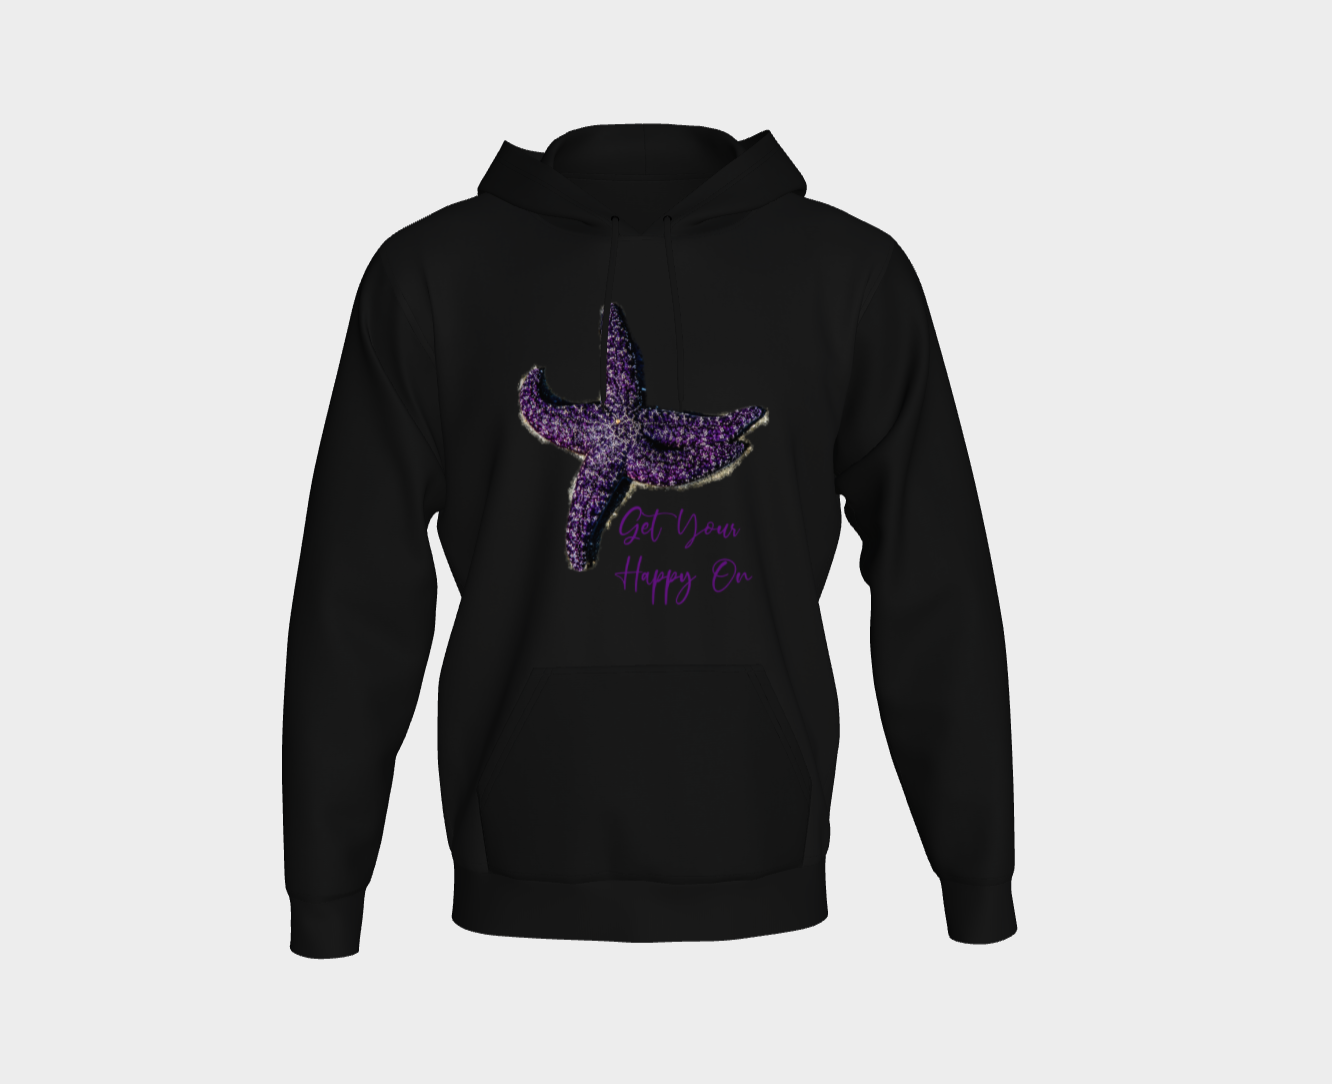 Get Your Happy On Starfish Unisex Pullover Hoodie Your Van Isle Goddess unisex pullover hoodie is a great classic hoodie!  Created with state of the art tri-tex material which is a non-shrink poly middle encased in two layers of ultra soft cotton face and lining.